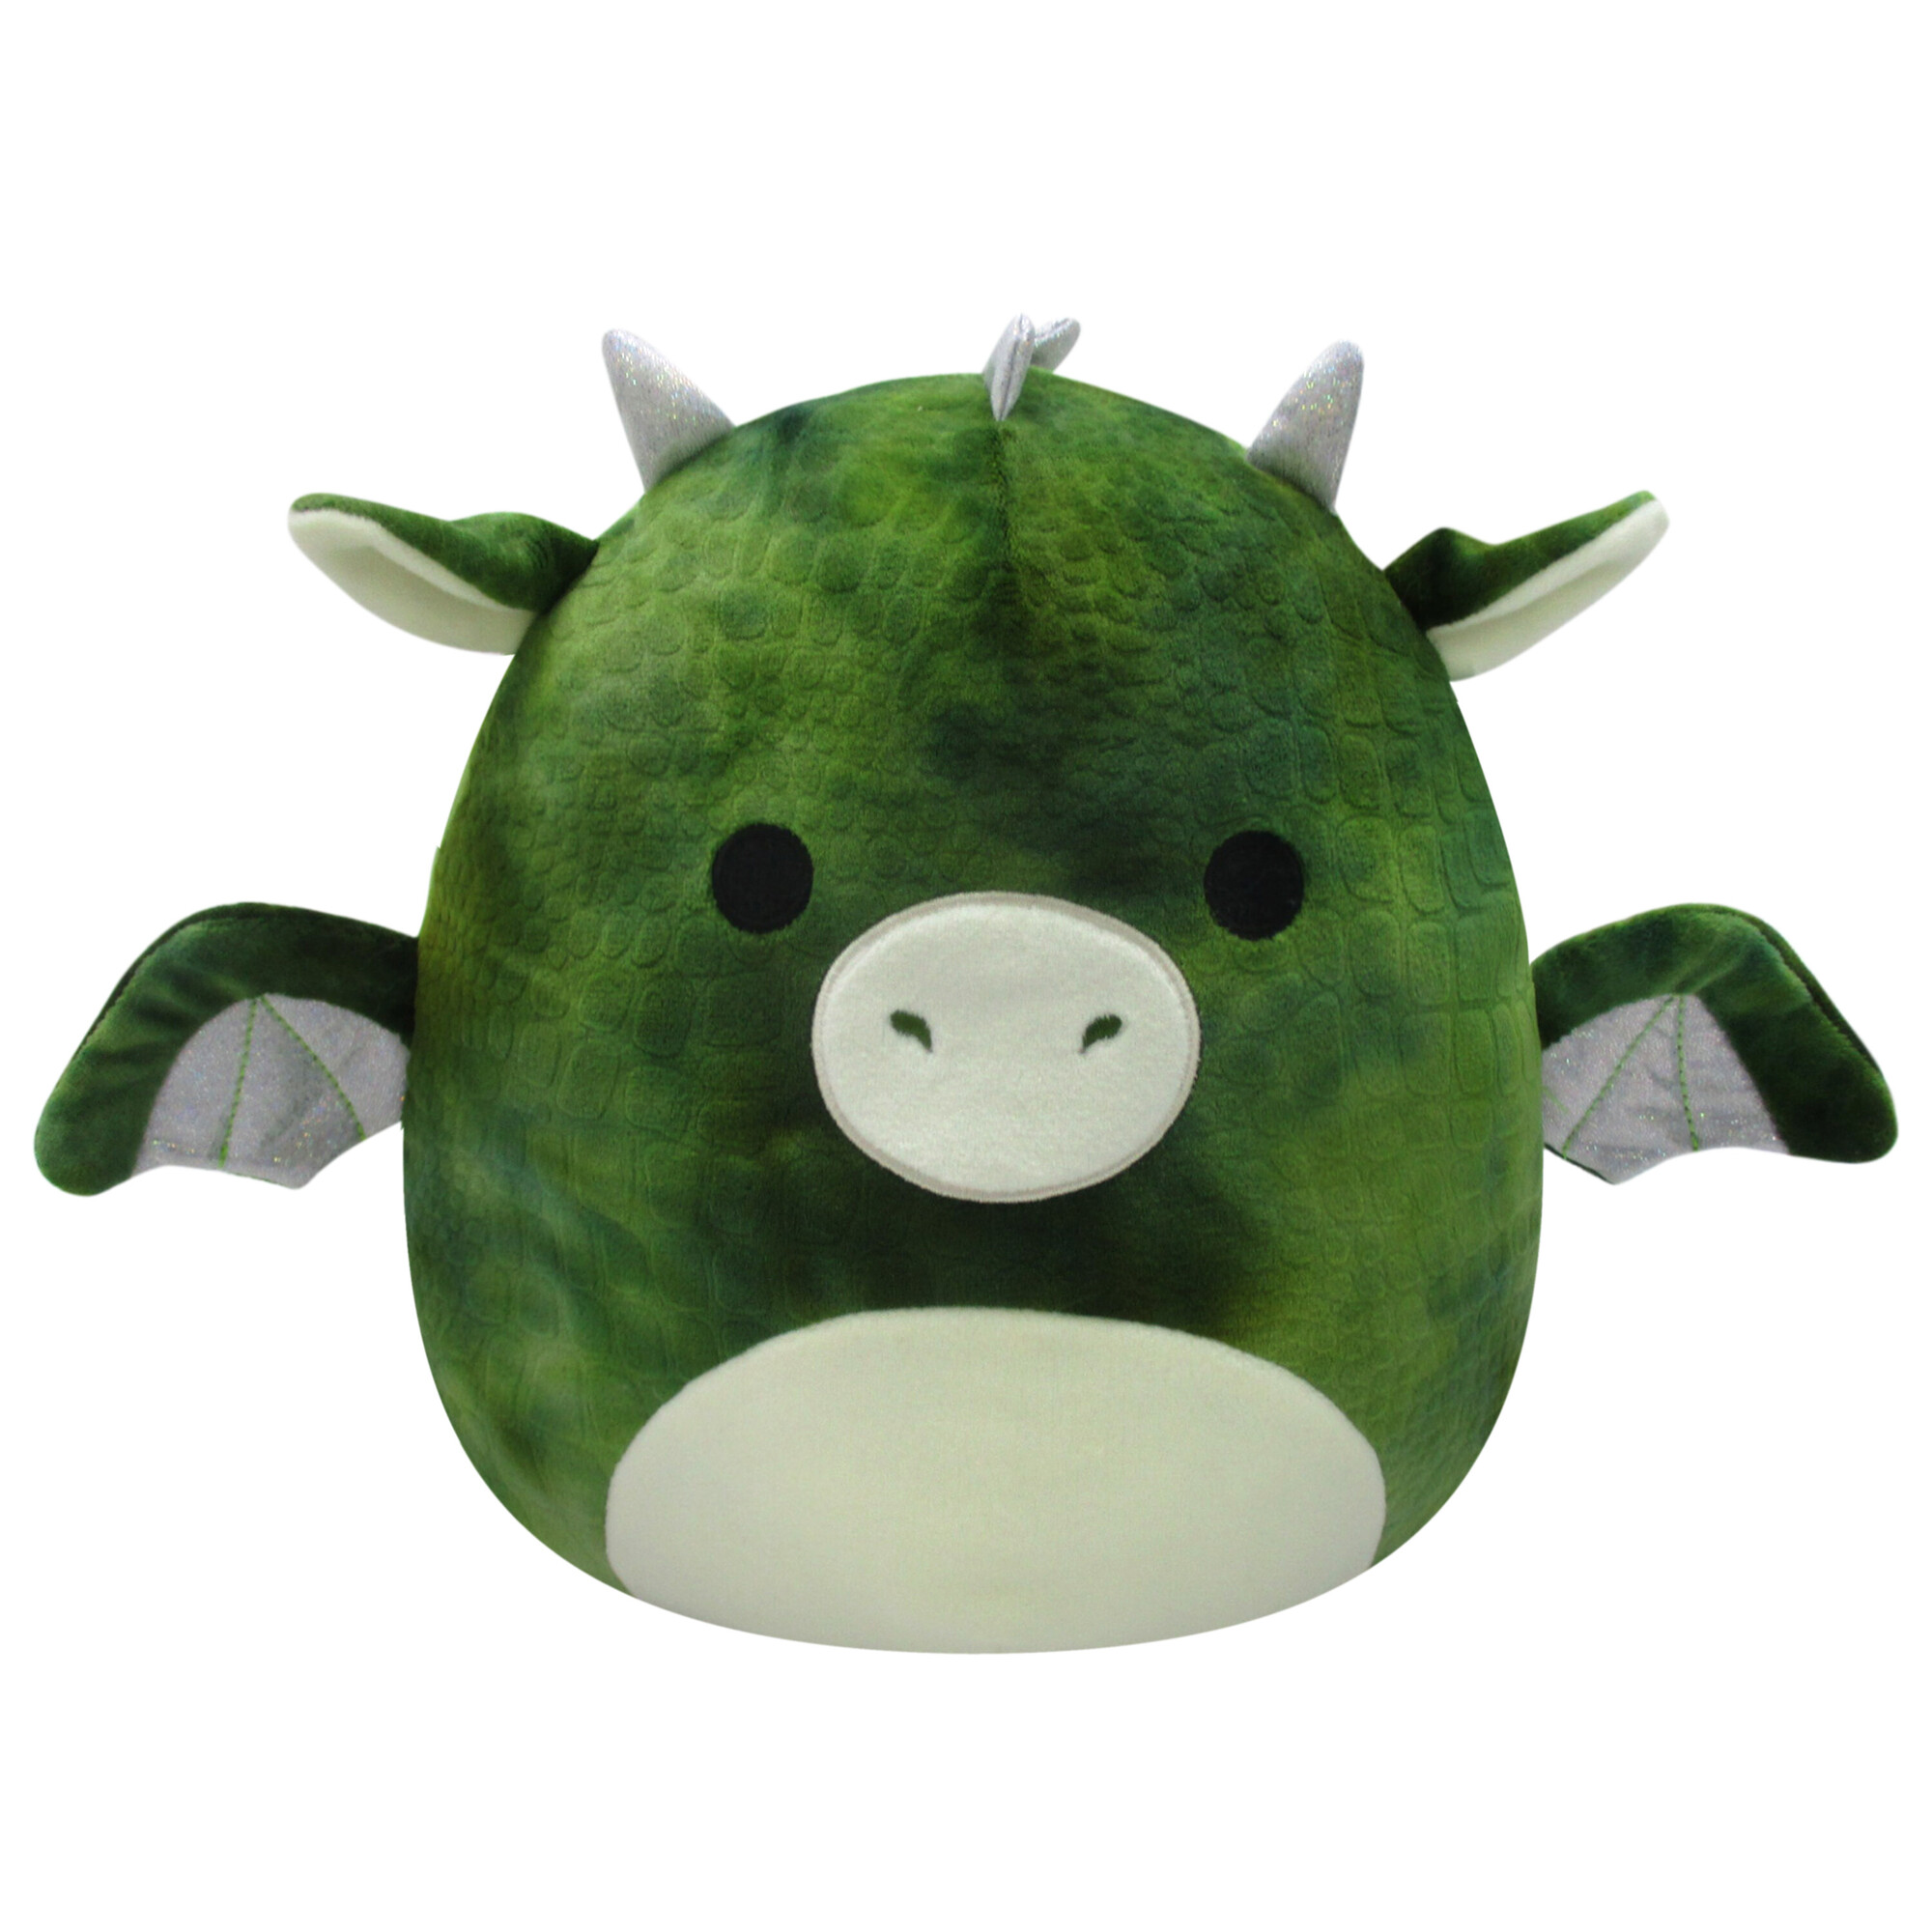 Squishmallows 10 inch Duke the Green Textured Dragon with Silver Horns - Child's Ultra Soft Stuffed Plush Toy - image 1 of 7